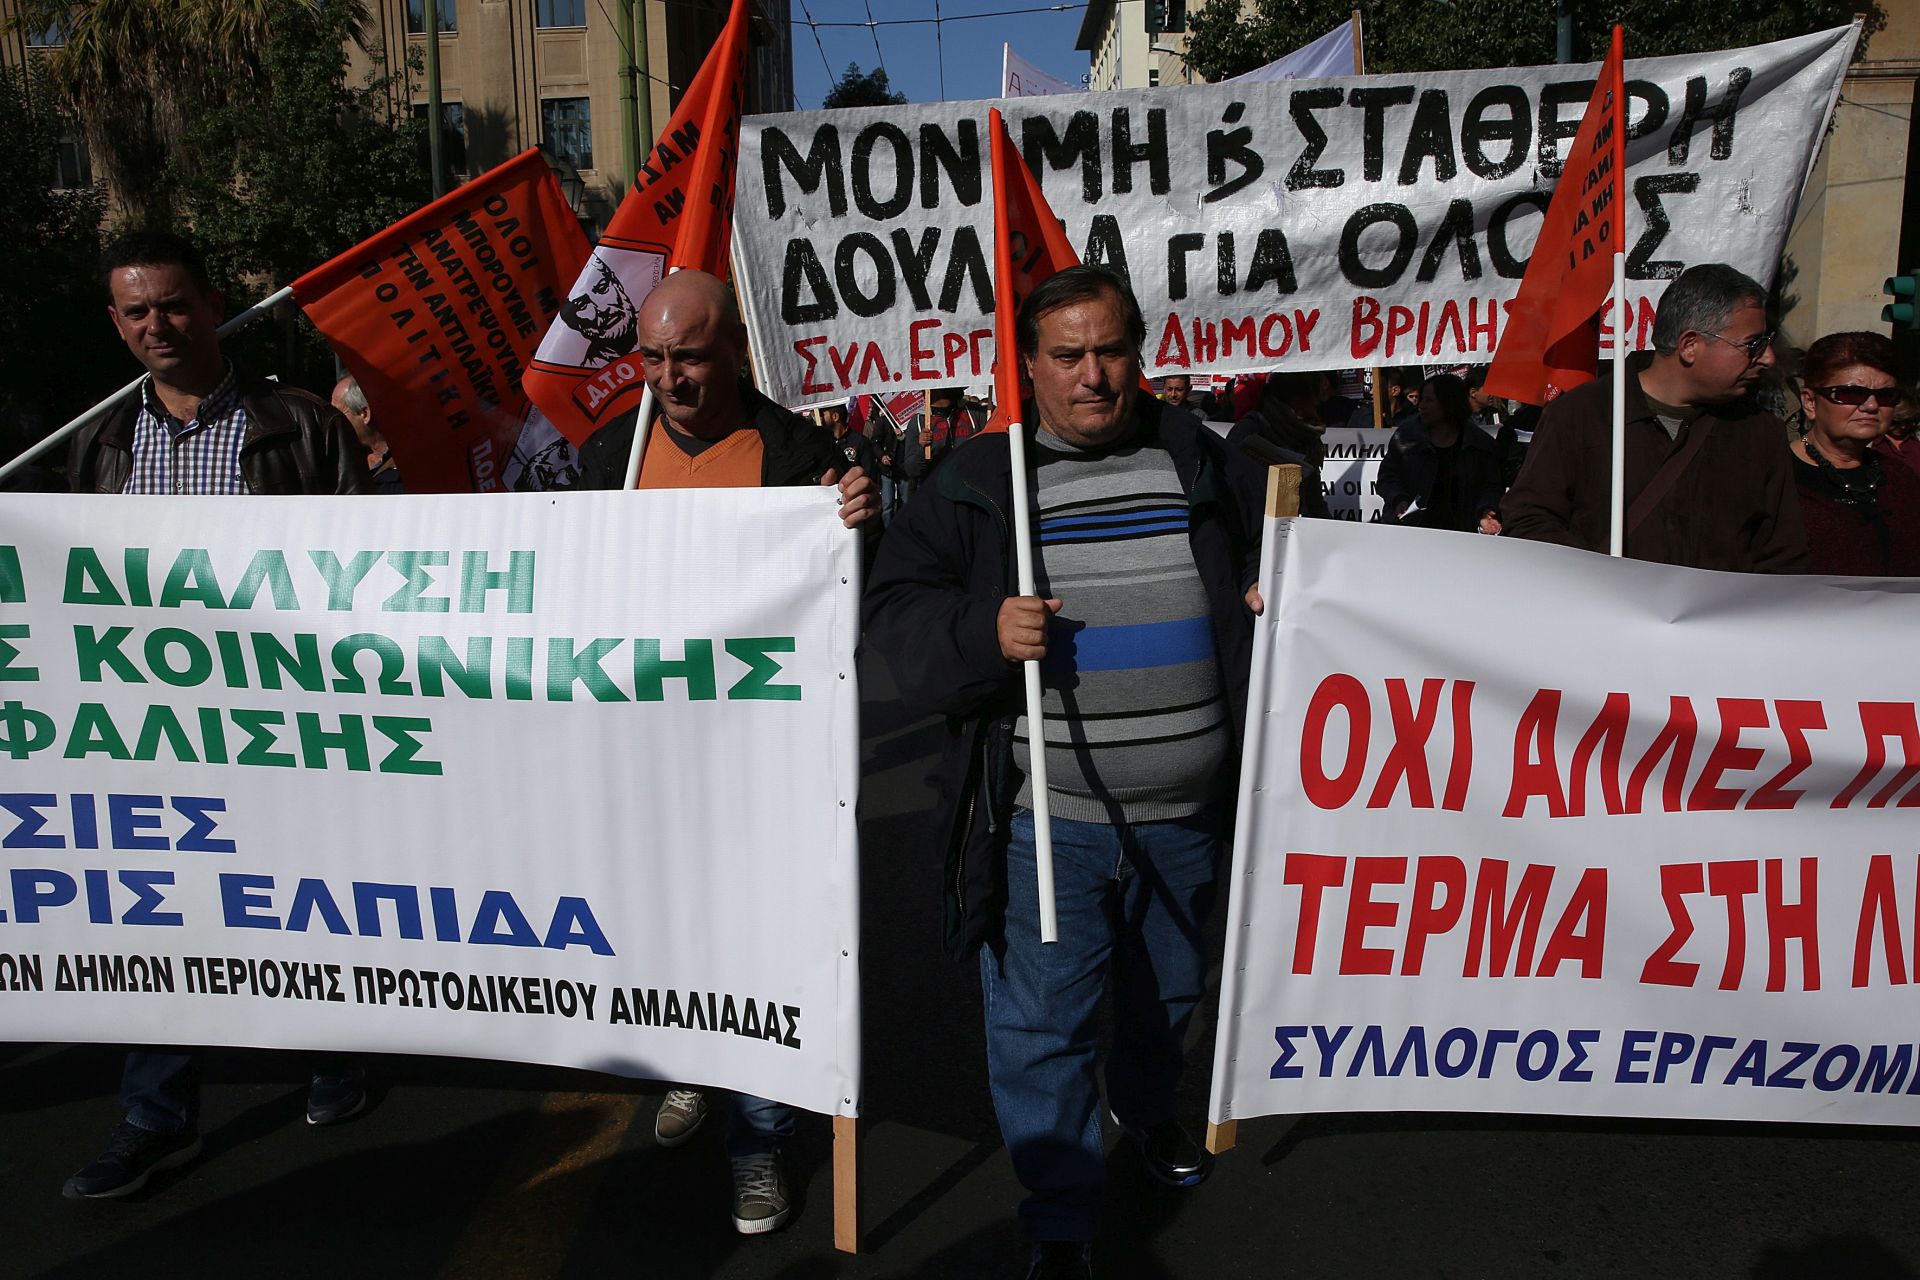 epa05645054 Striking workers of the public sector shout slogans as they demonstrate in central Athens, Greece, on 24 November 2016. The public sector workers are on a 24 hour strike protesting against labour changes imposed by the Greek government and the country's lenders.  EPA/ORESTIS PANAGIOTOU